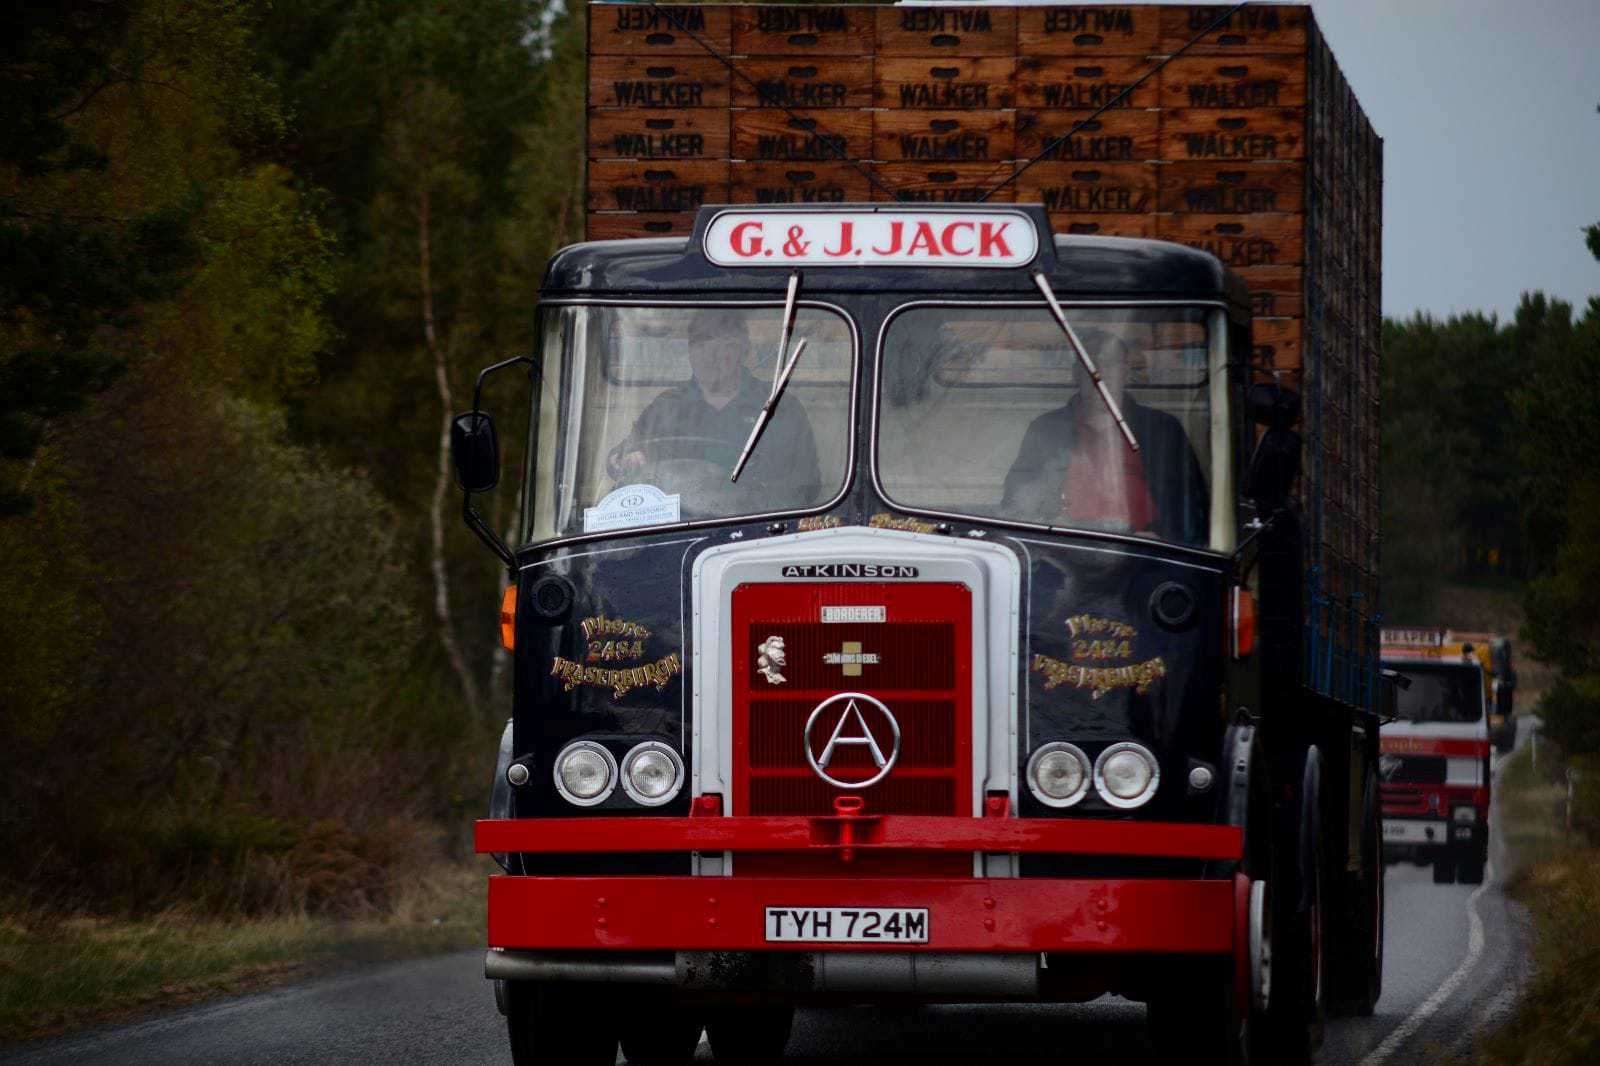 Classic Lorry owned by Sandy Downie from Fraserburgh, 1973 Atkinson Borderer. Well restored and has participated in many of the previous road runs over the years.